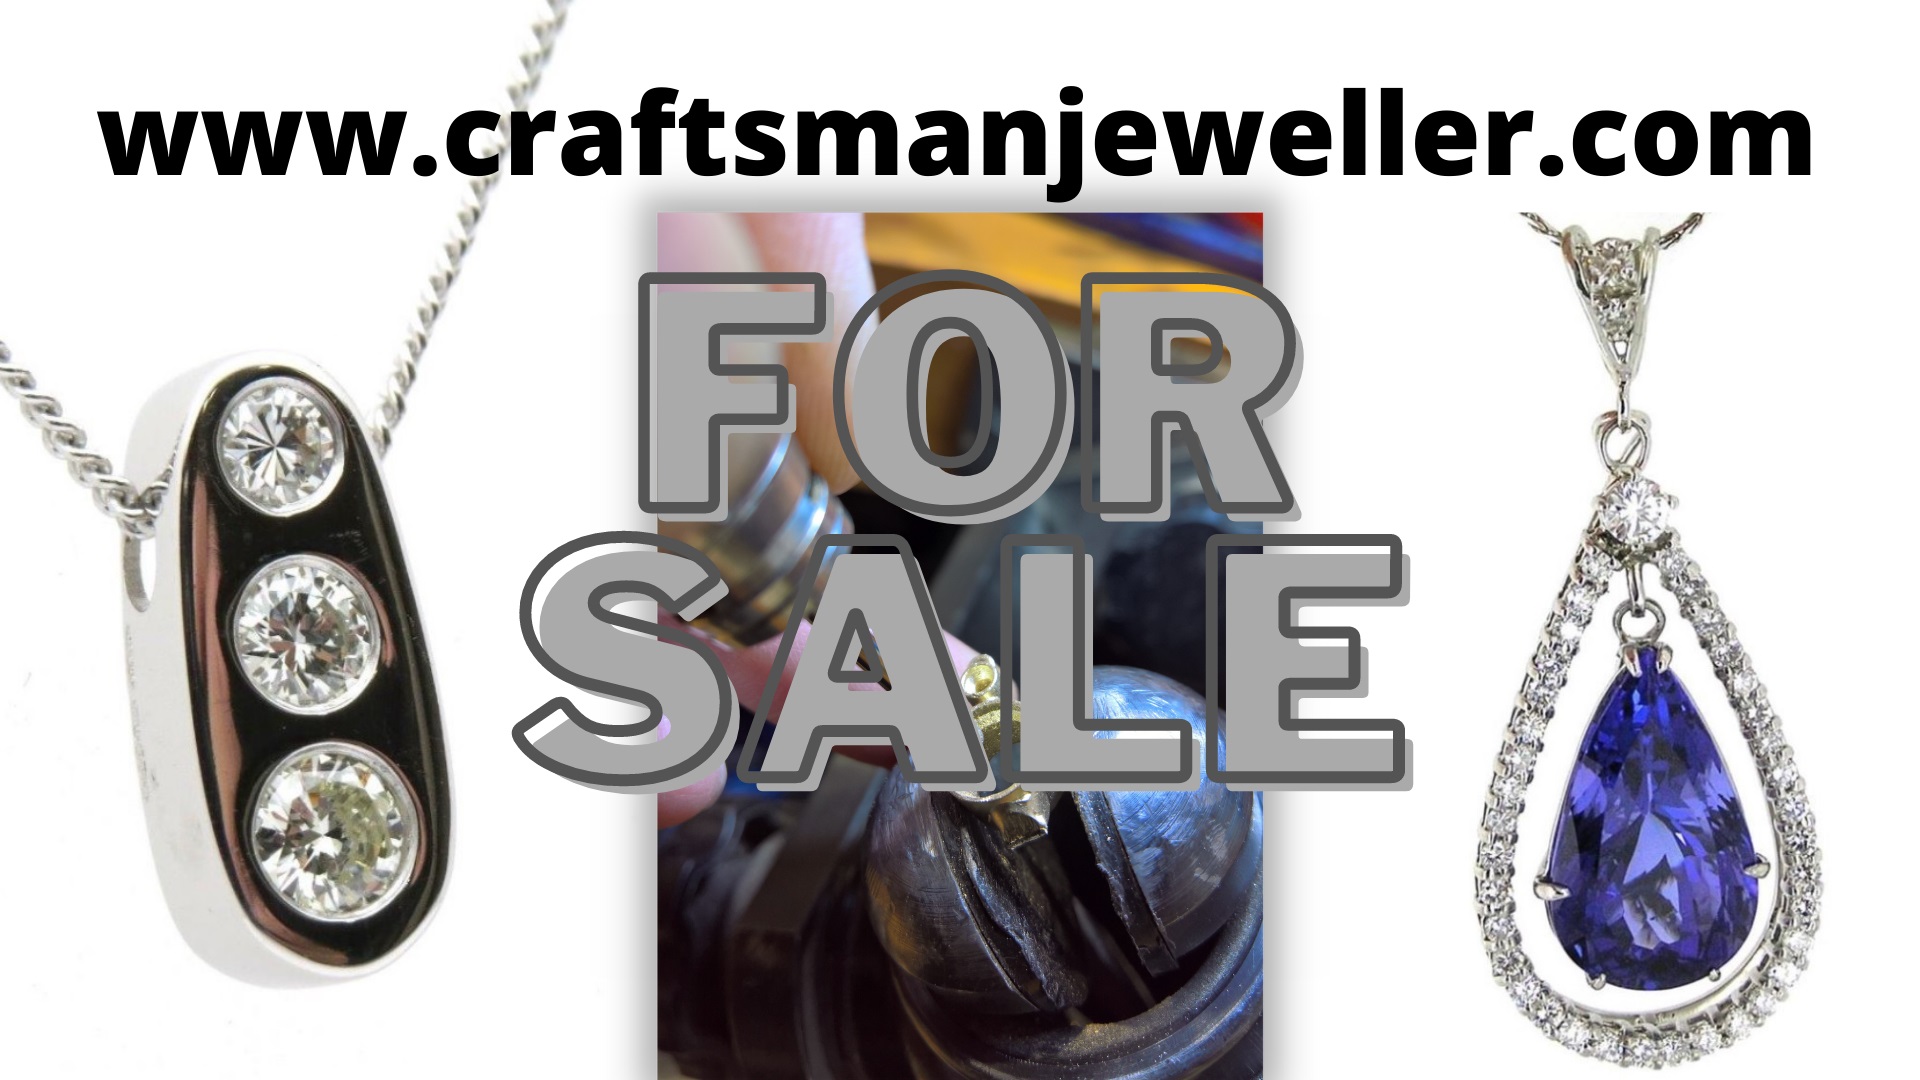 a banner for craftsmanjeweller.com domain for sale by strongfields the jeweller